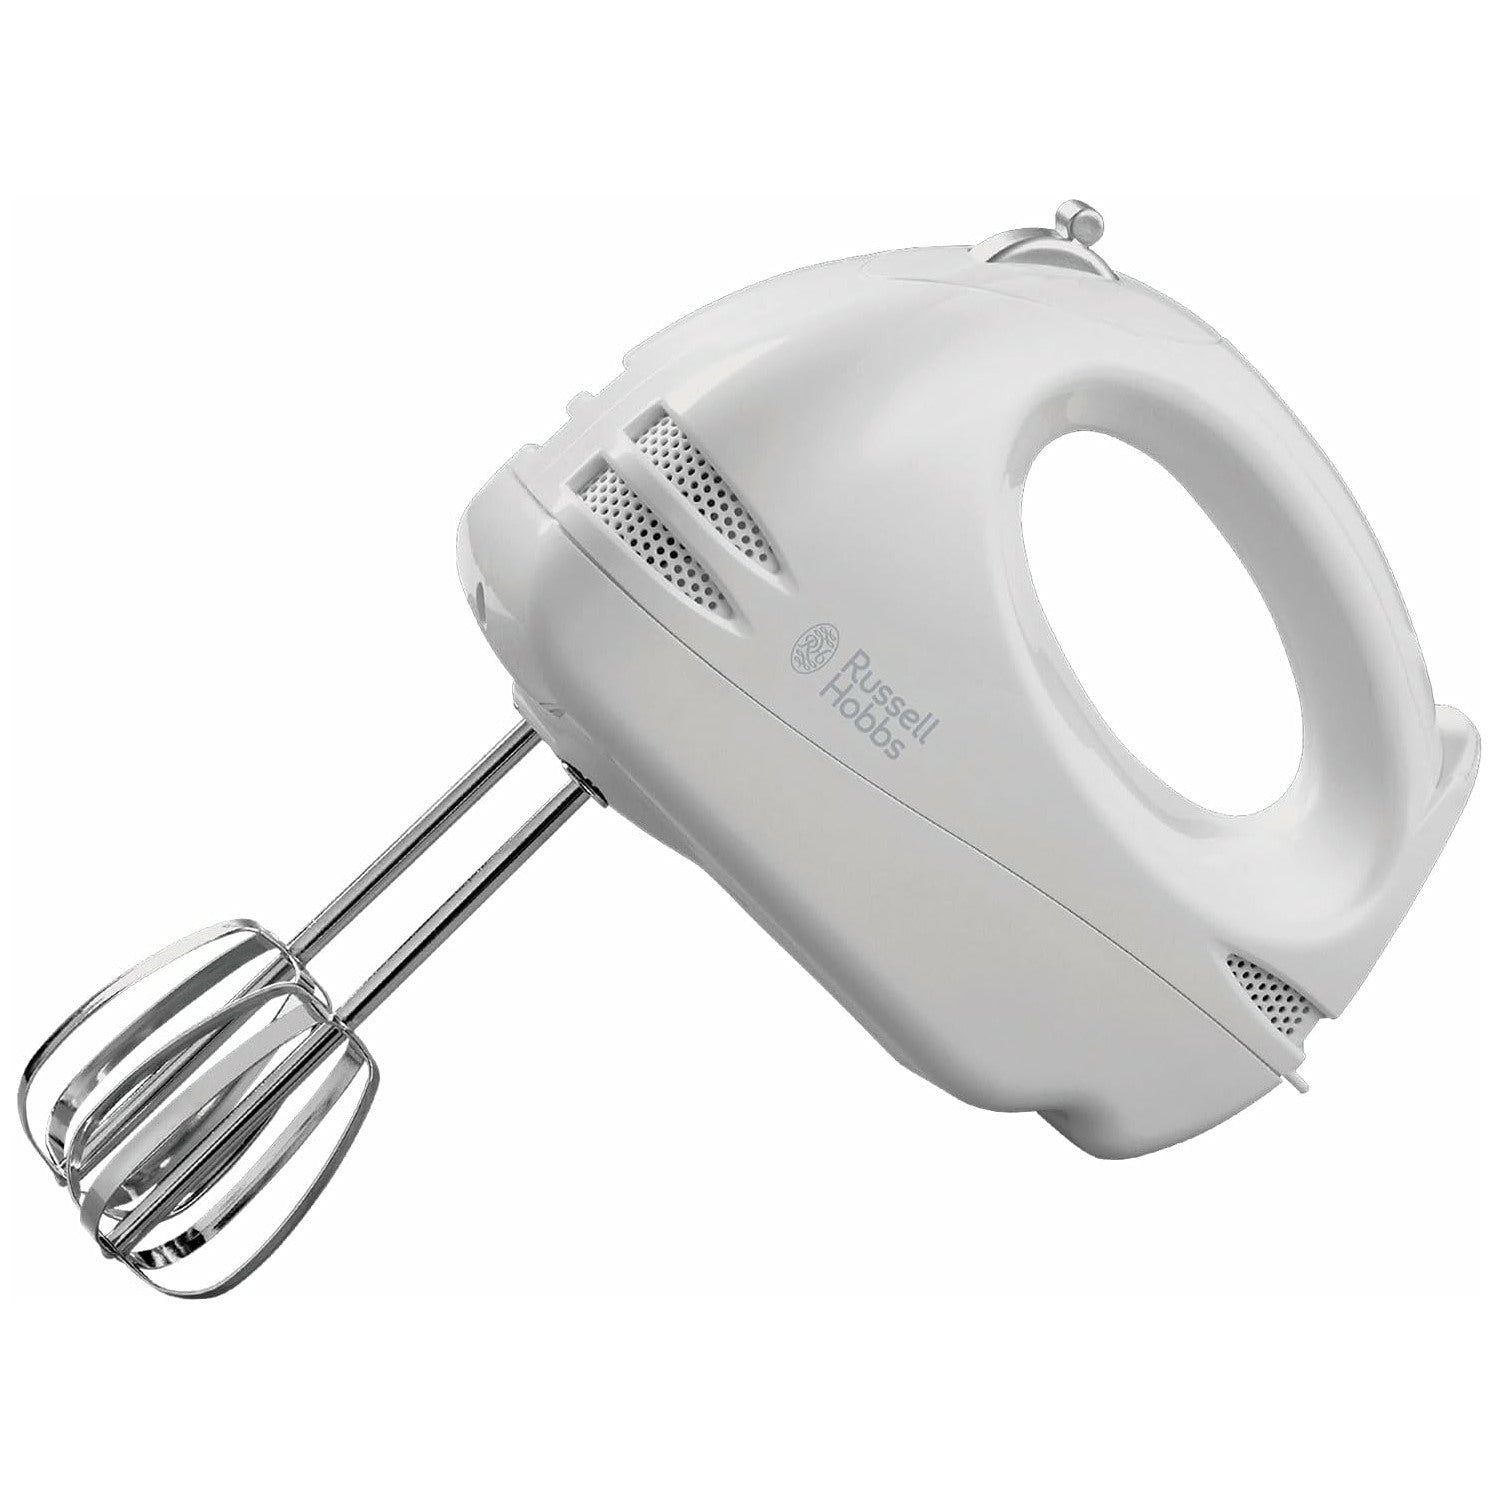 Russell Hobbs Electric Hand Mixer: 14451